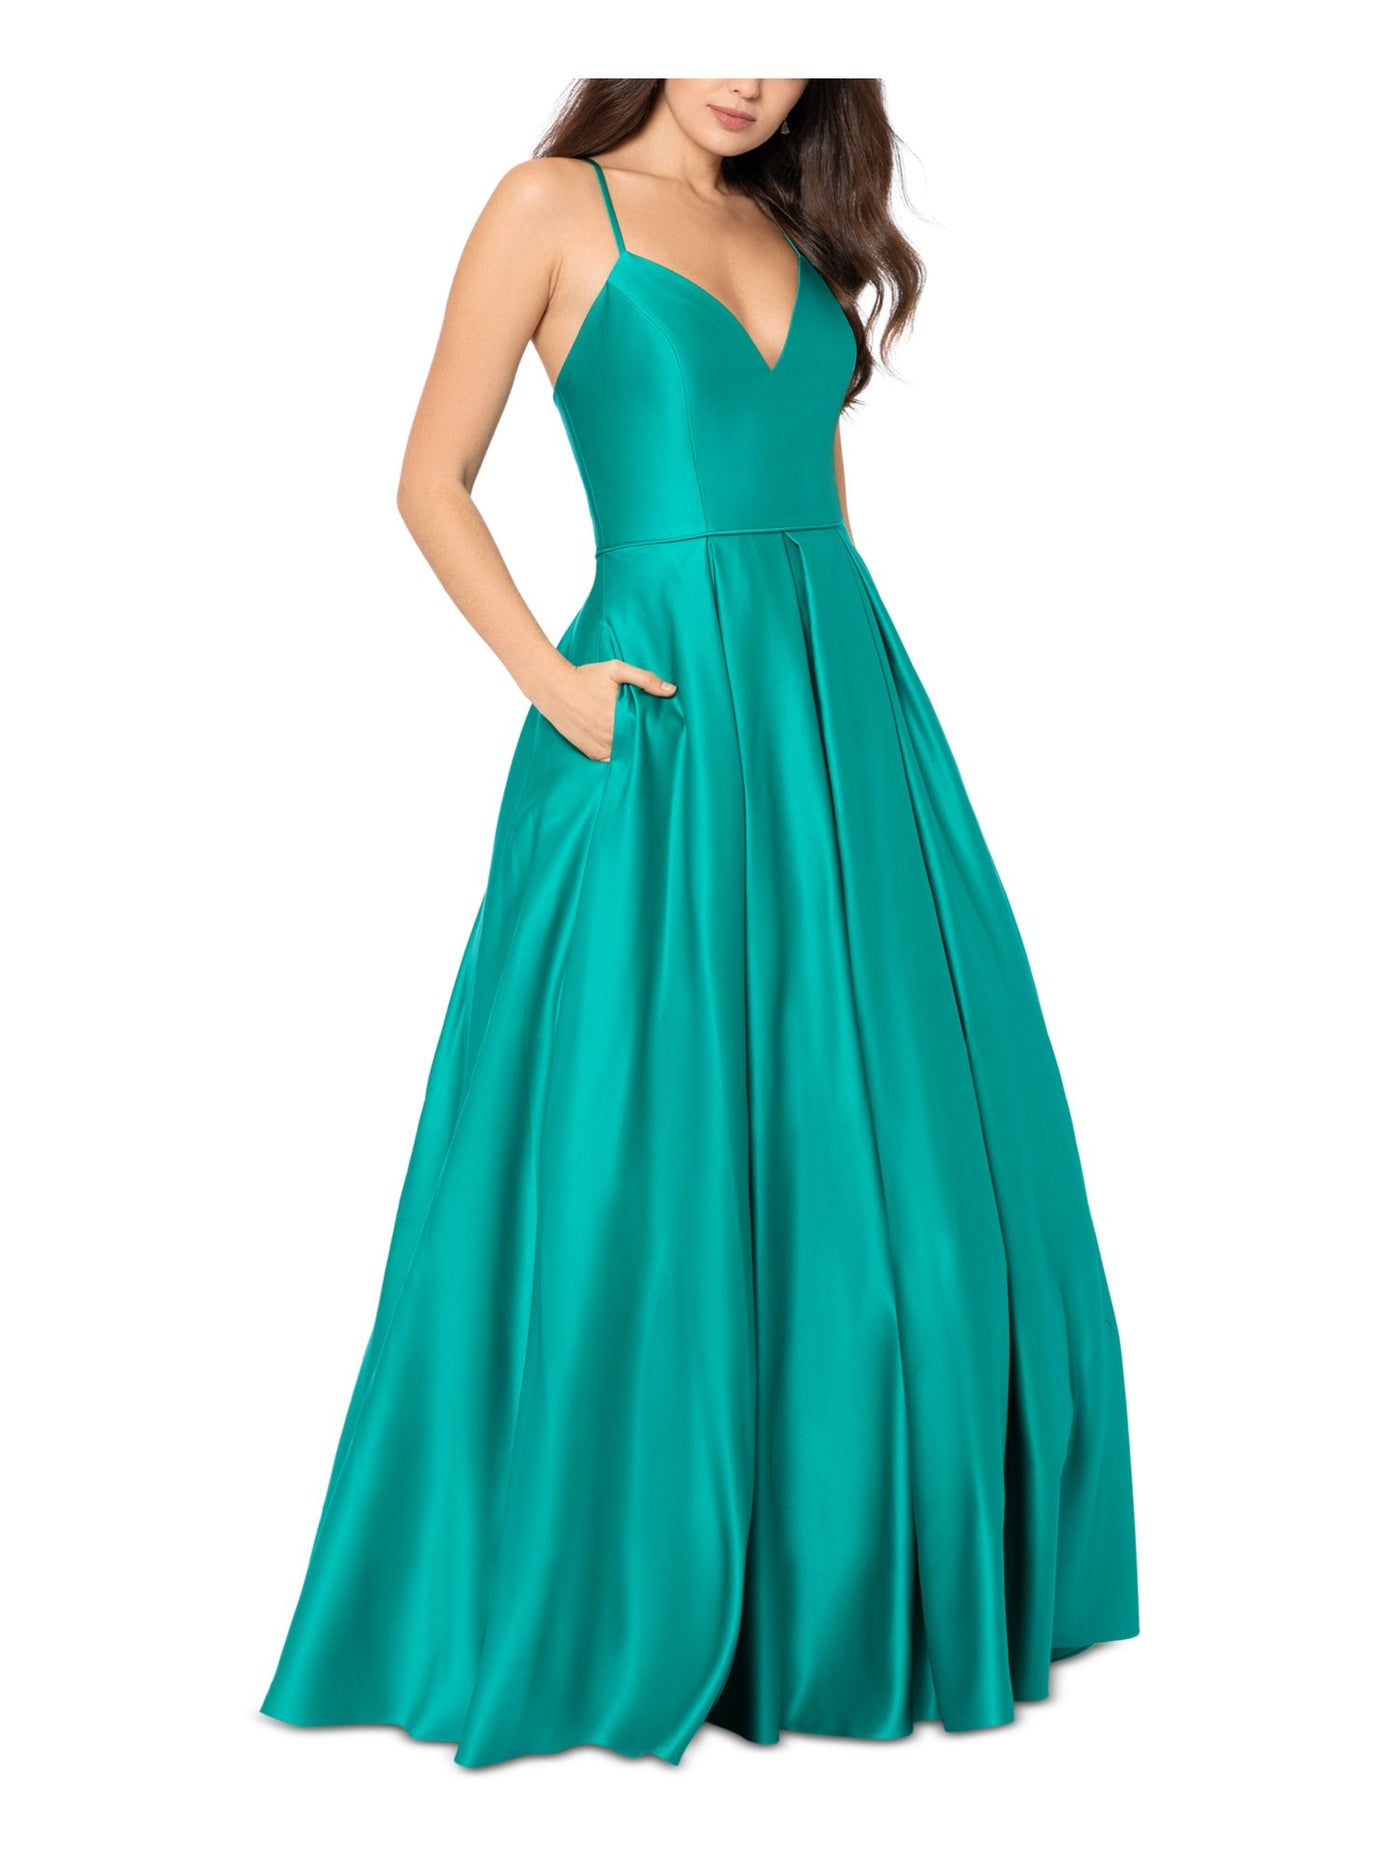 BLONDIE NITES Womens Teal Zippered Pleated Lace-up Back Pocketed Lined Spaghetti Strap V Neck Full-Length Prom Gown Dress Juniors 3